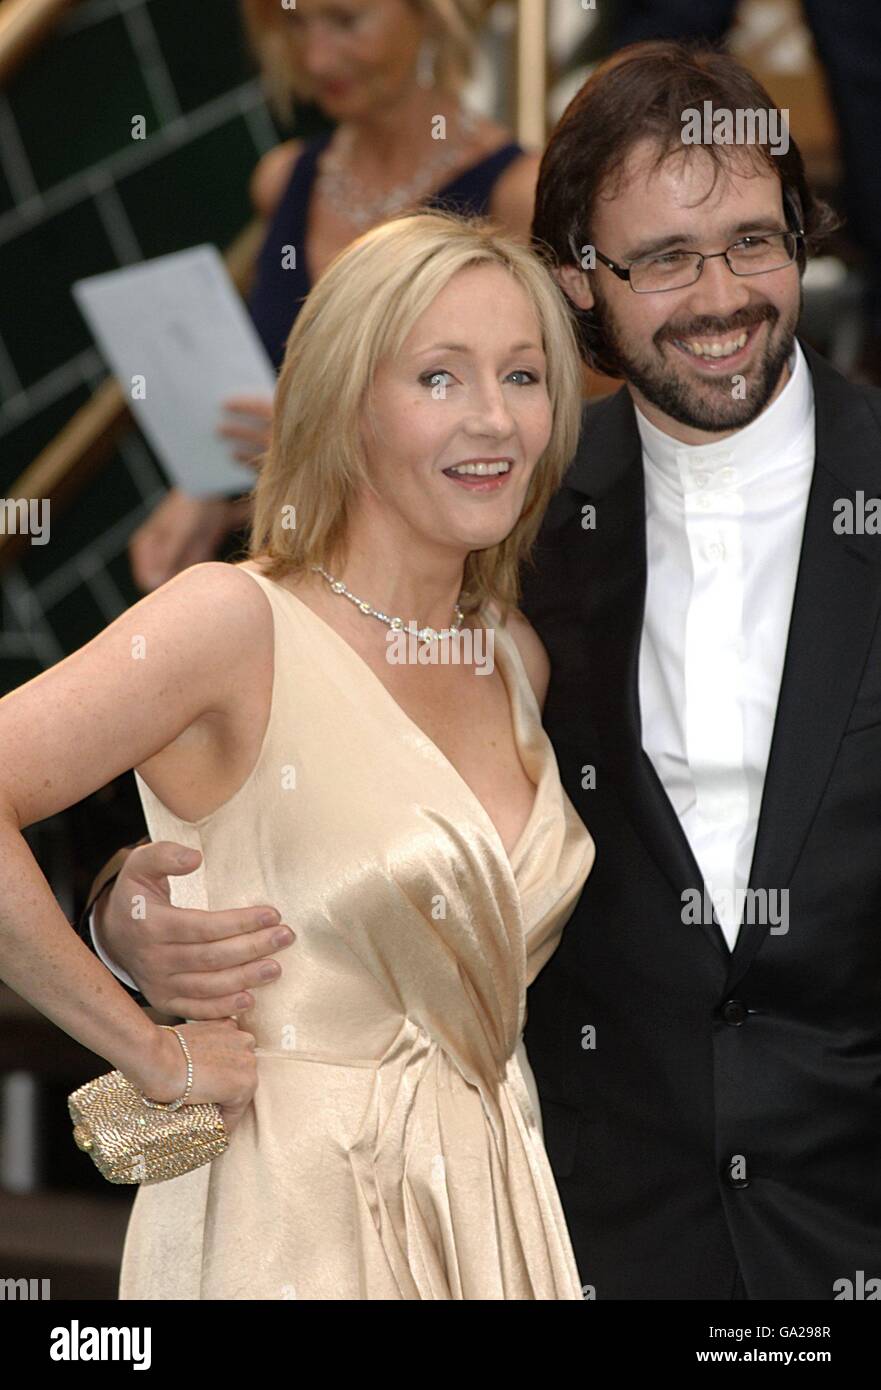 J.K. Rowling and her husband Neil Murray arrive for the UK Premiere of Harry Potter And The Order Of The Phoenix at the Odeon Leicester Square, central London. Stock Photo